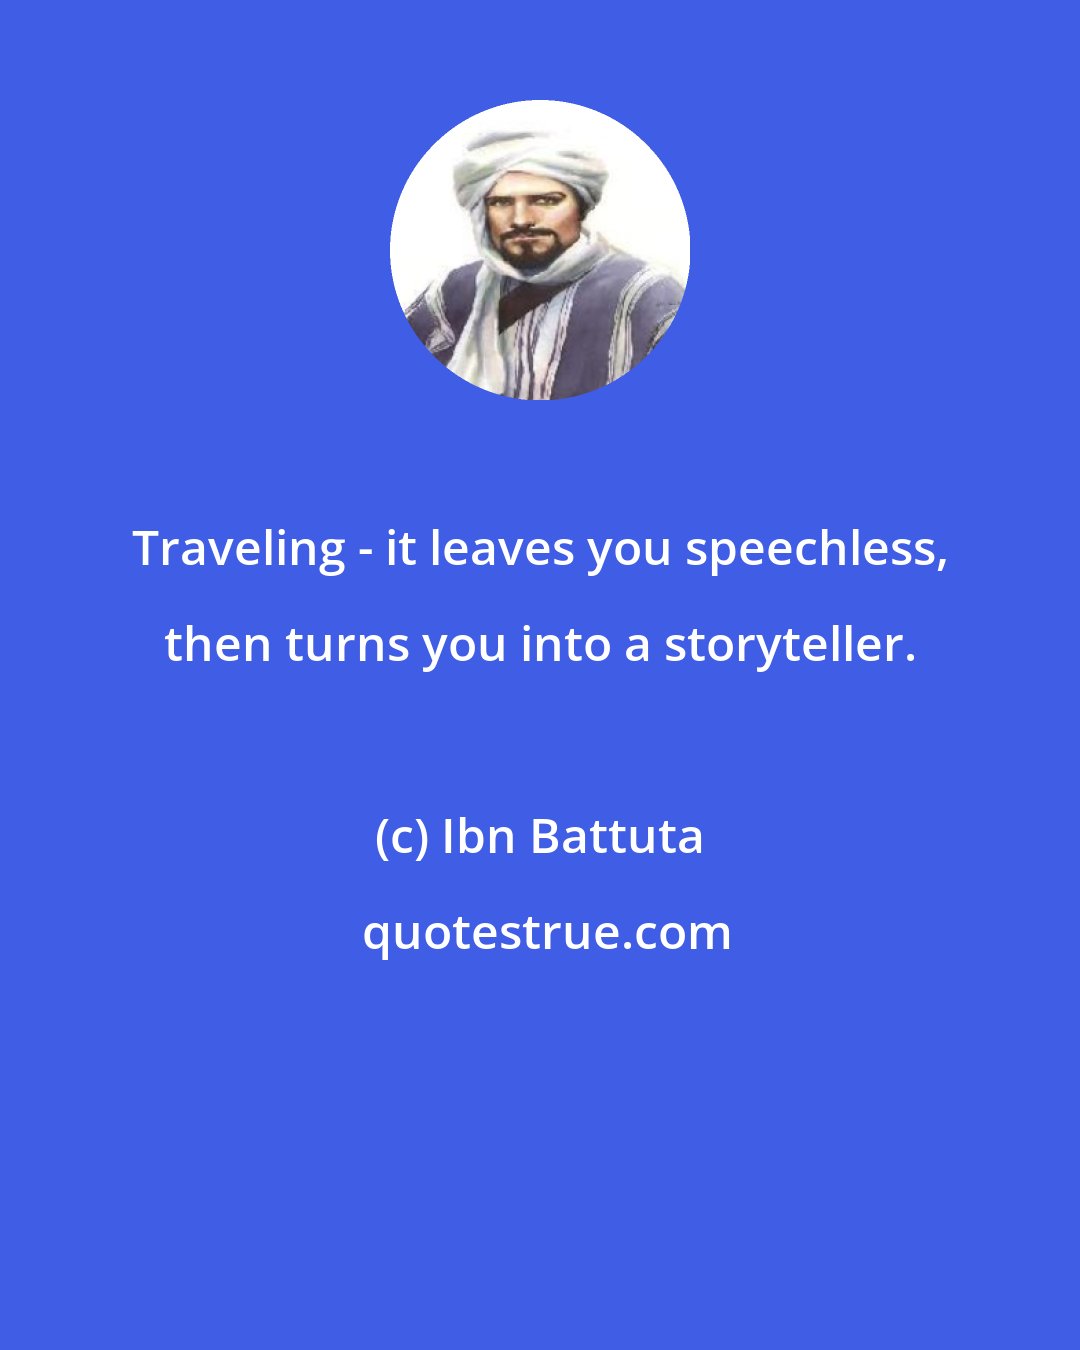 Ibn Battuta: Traveling - it leaves you speechless, then turns you into a storyteller.